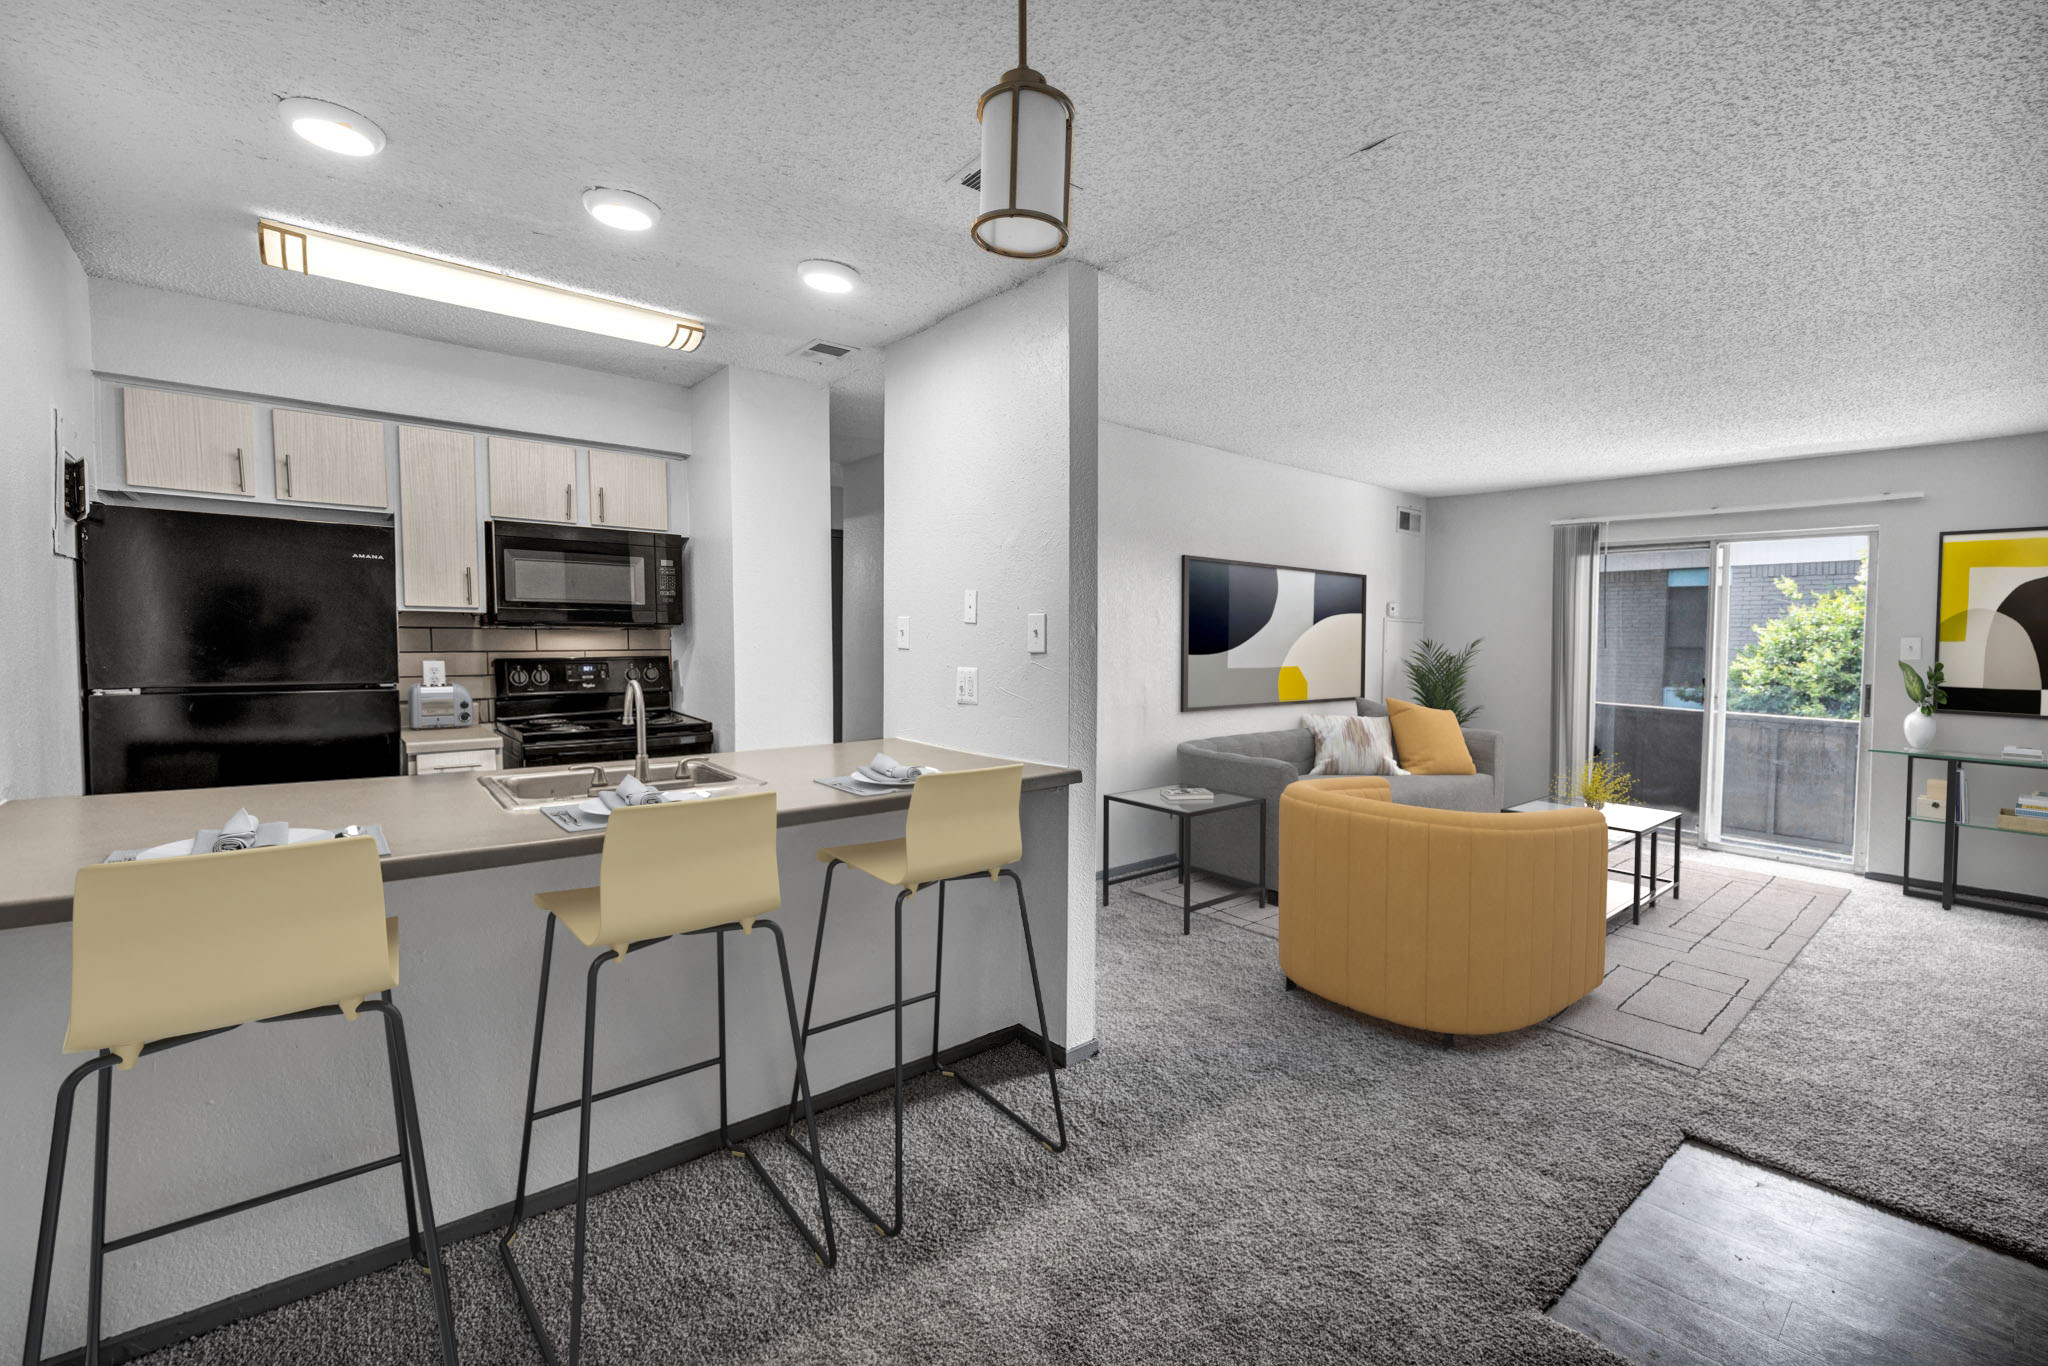 Kitchen and Living area at The Edge Apartments Homes